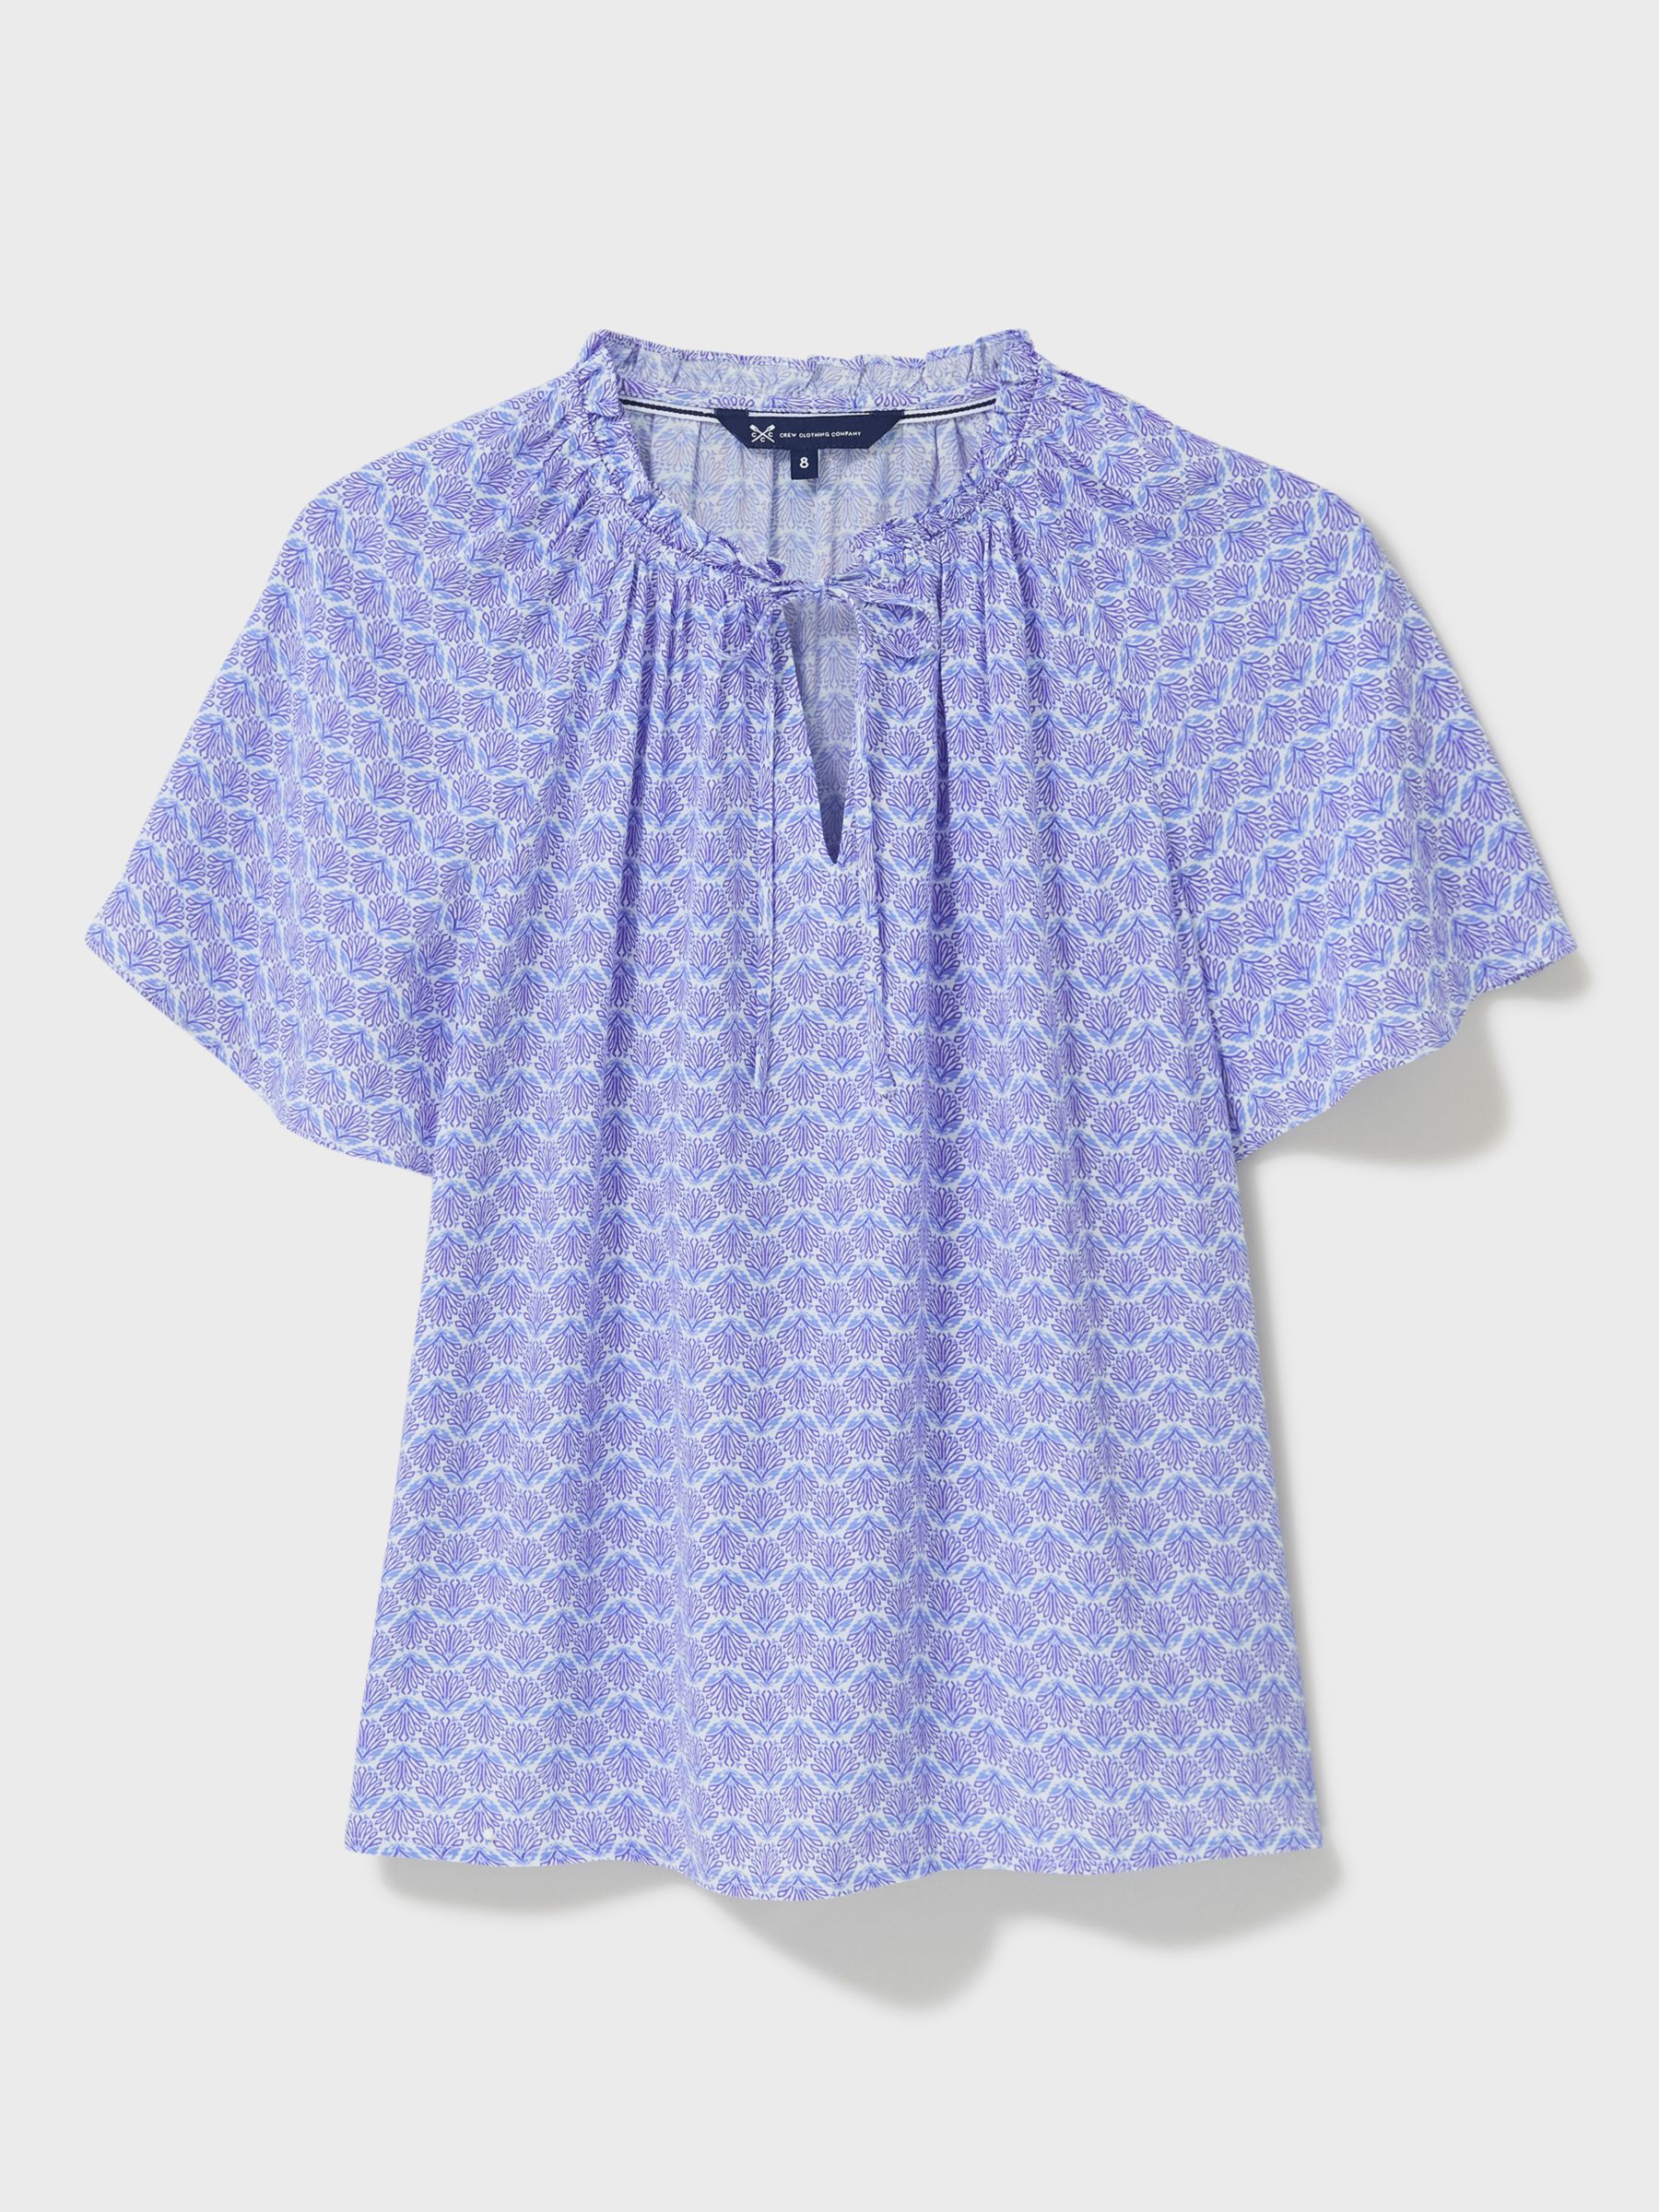 Crew Clothing Ada Floral Blouse, Blue at John Lewis & Partners